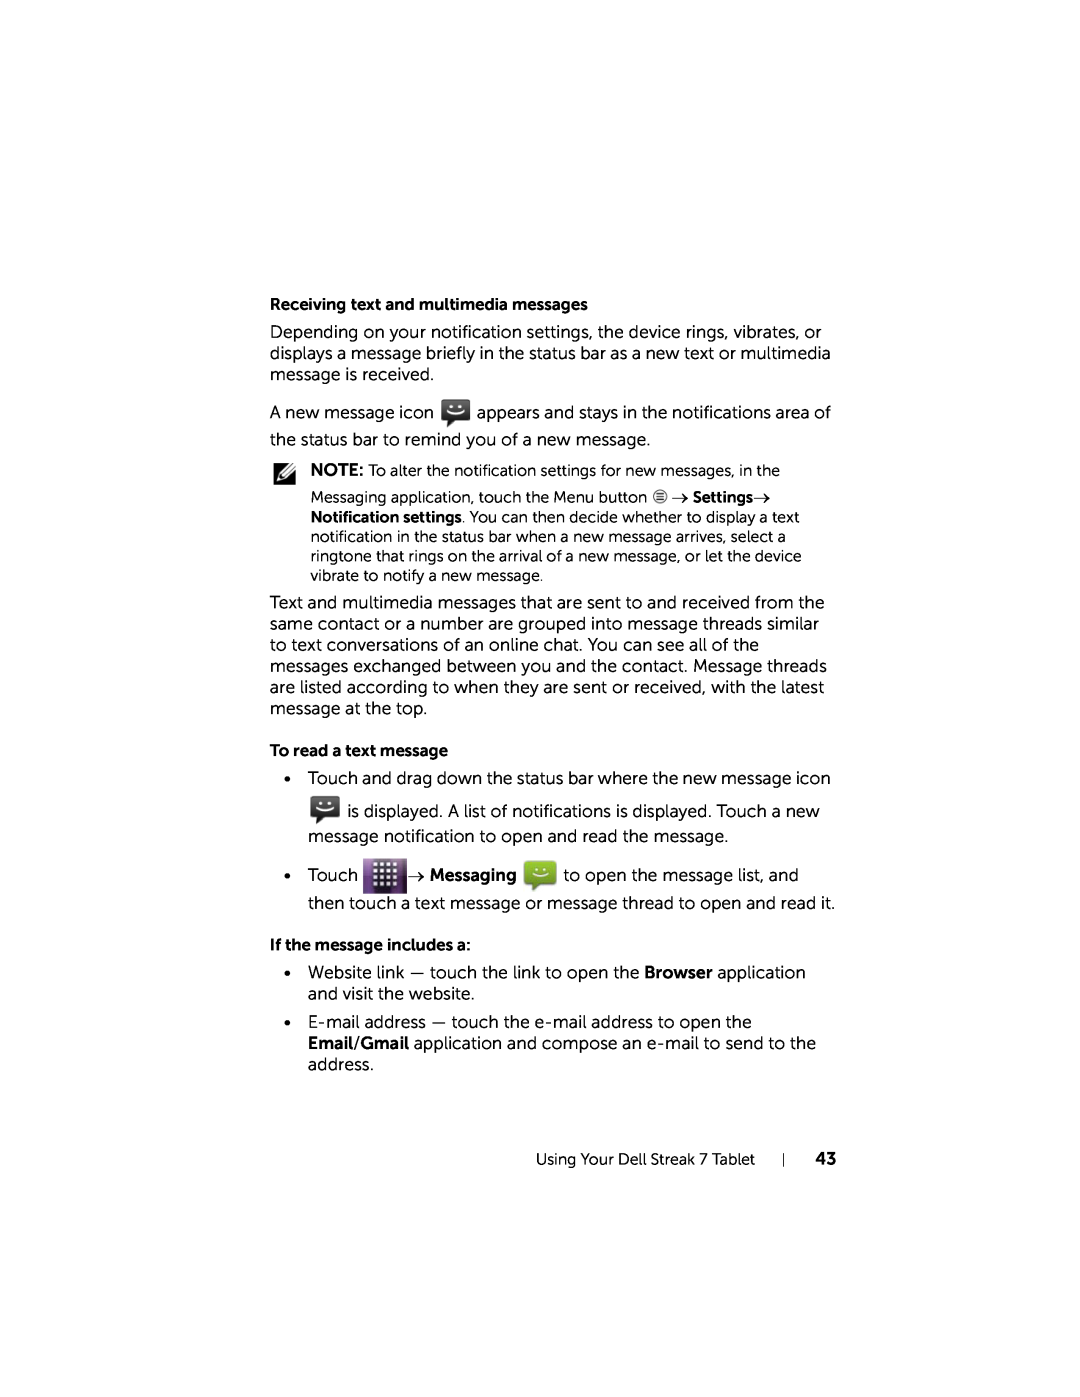 Dell 7 user manual Receiving text and multimedia messages 